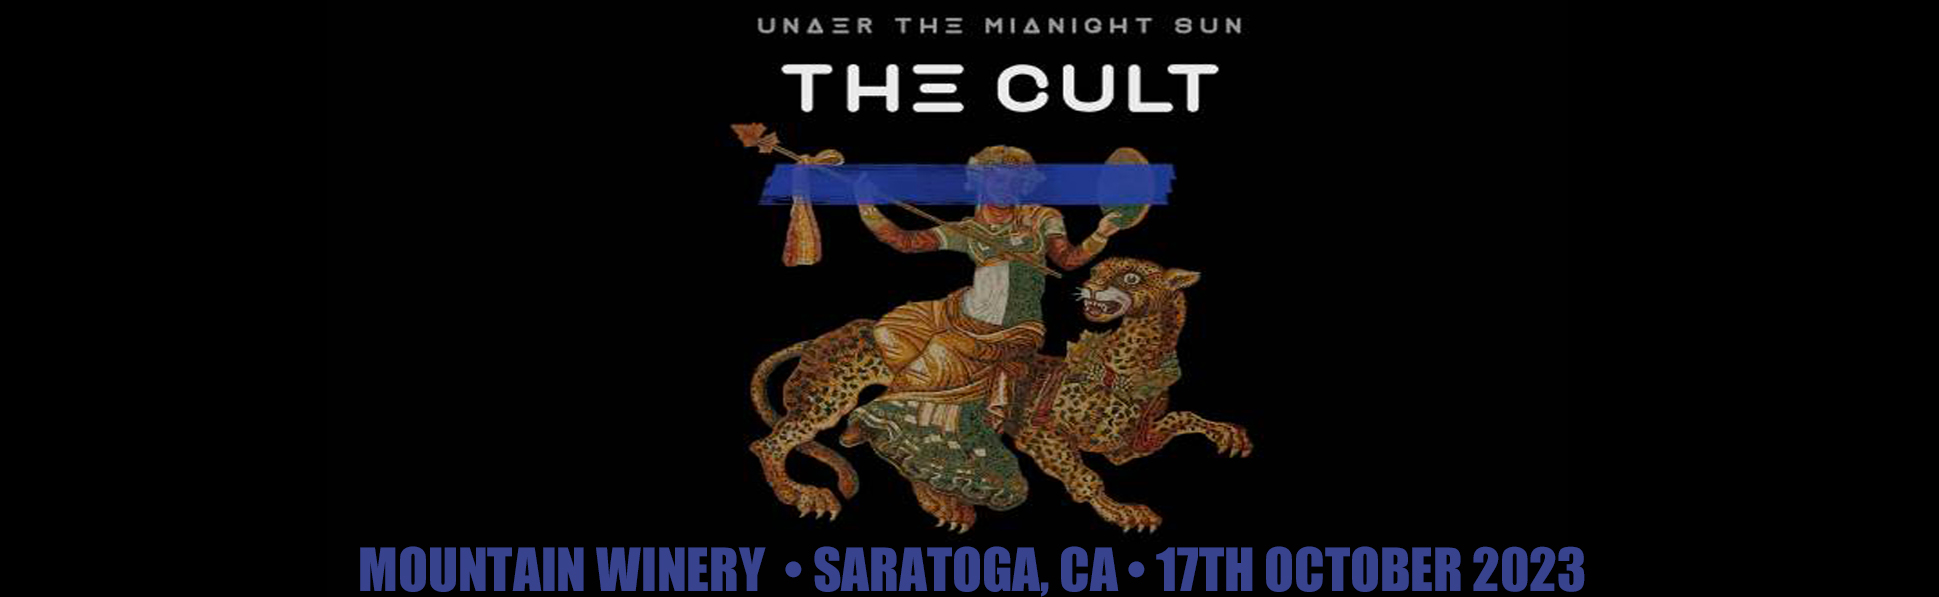 The Cult at Mountain Winery